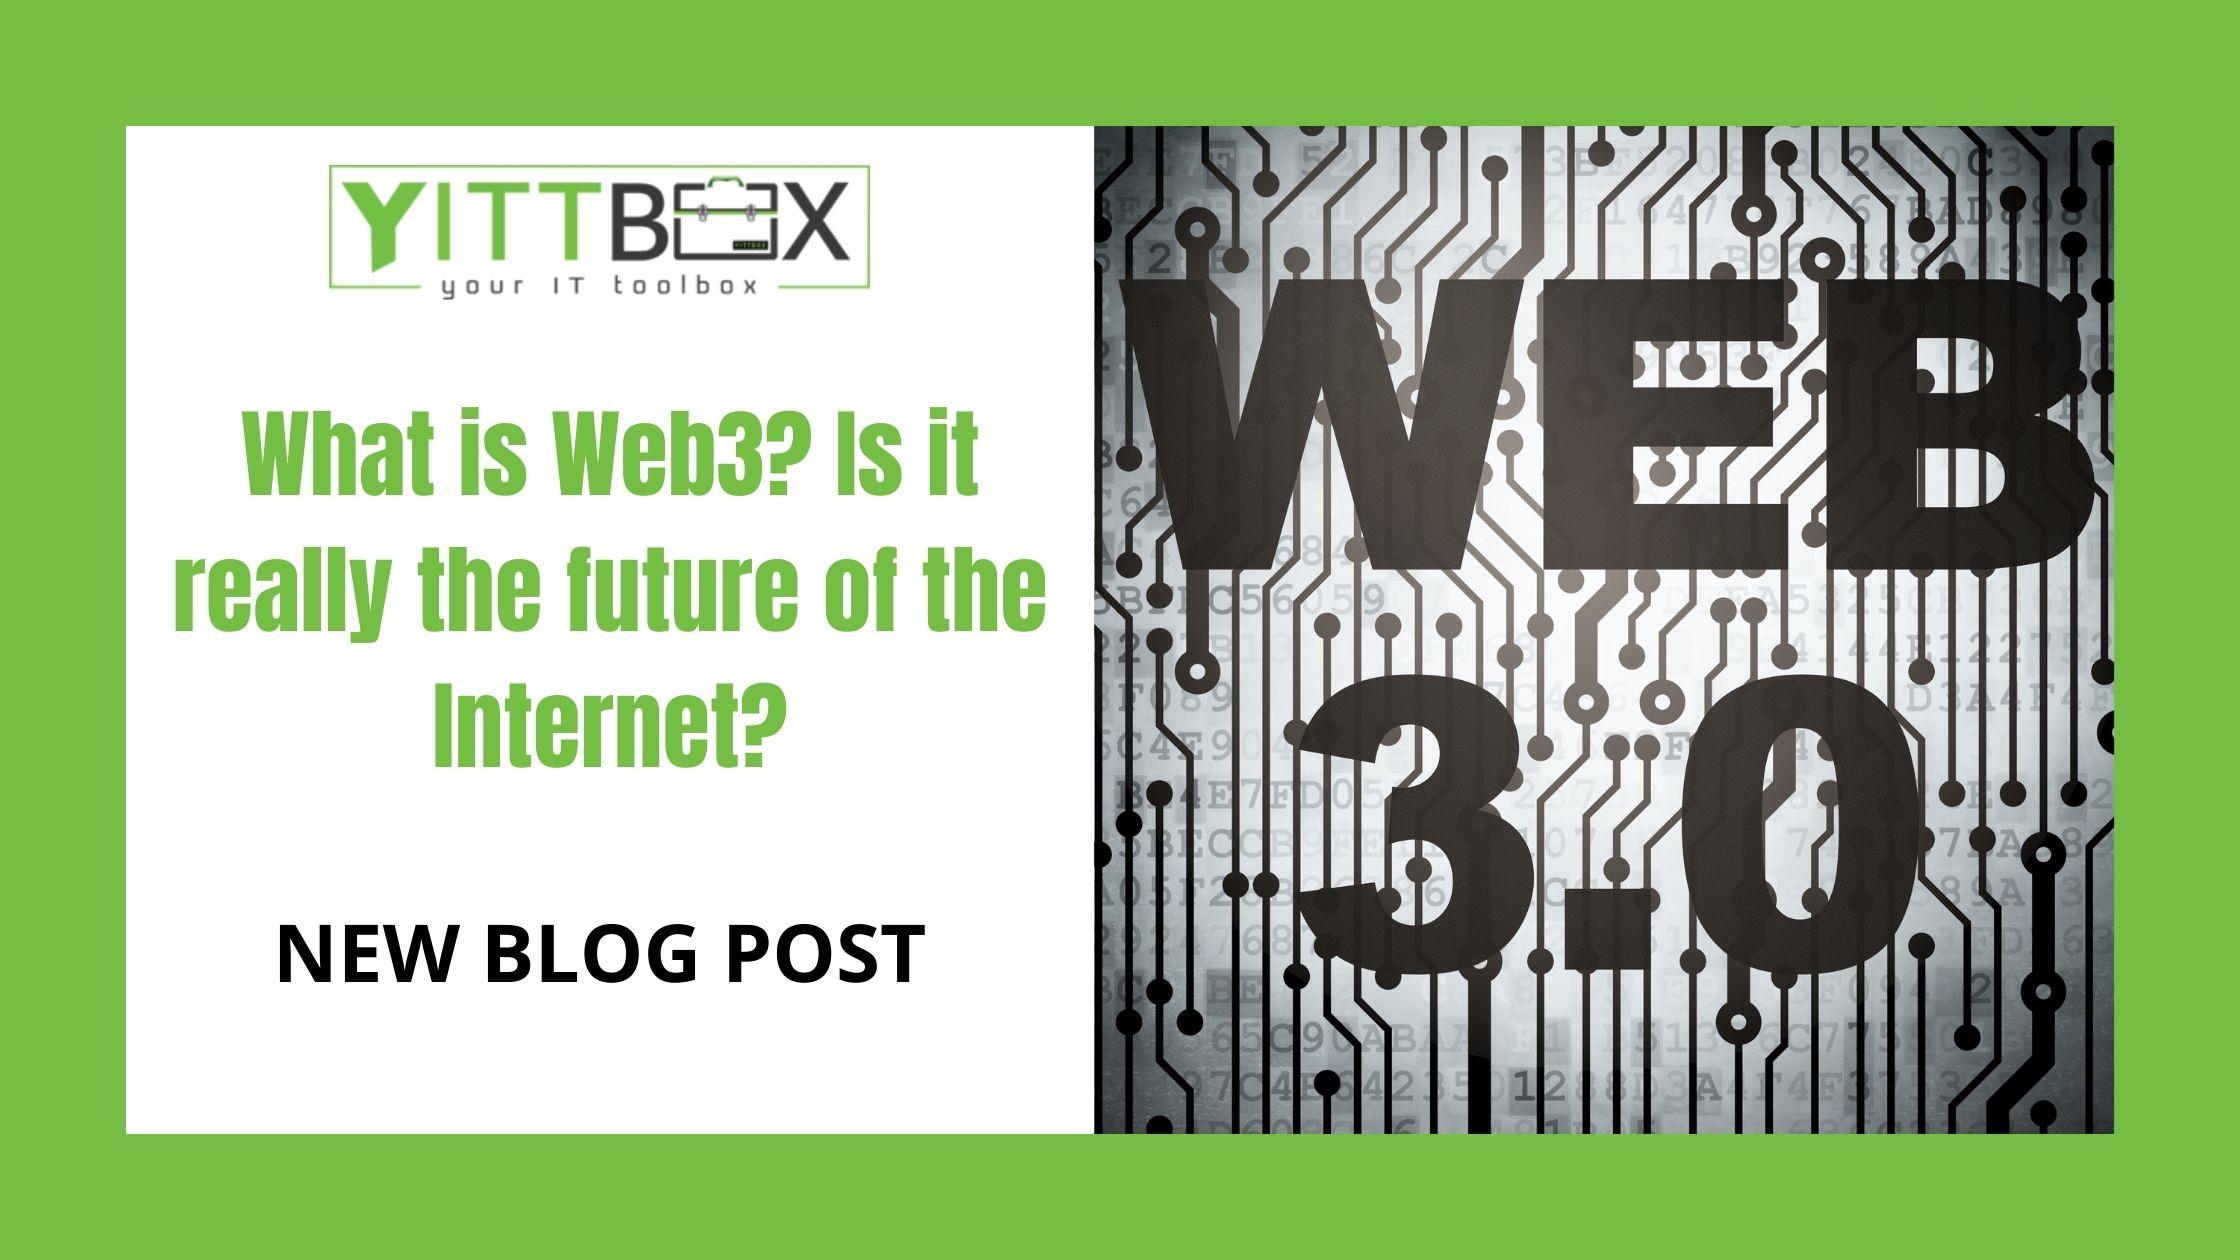 What is Web3? Is it really the future of the Internet?